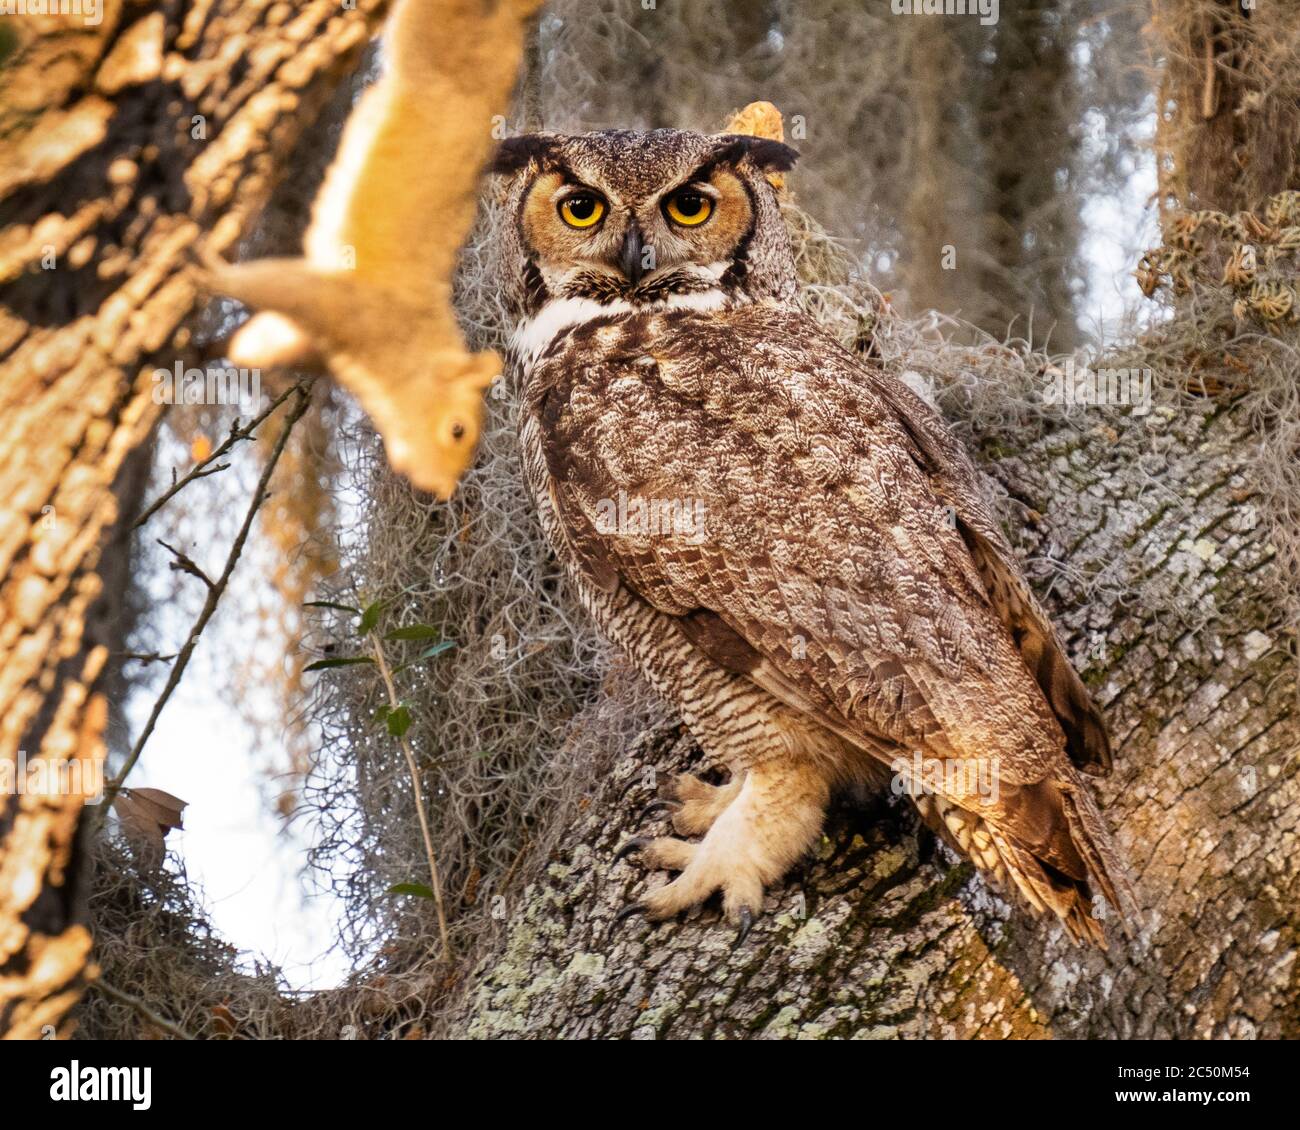 Nesting Great Horned Owl Watches Squirrel Arrampicata vicino a Nest Foto Stock